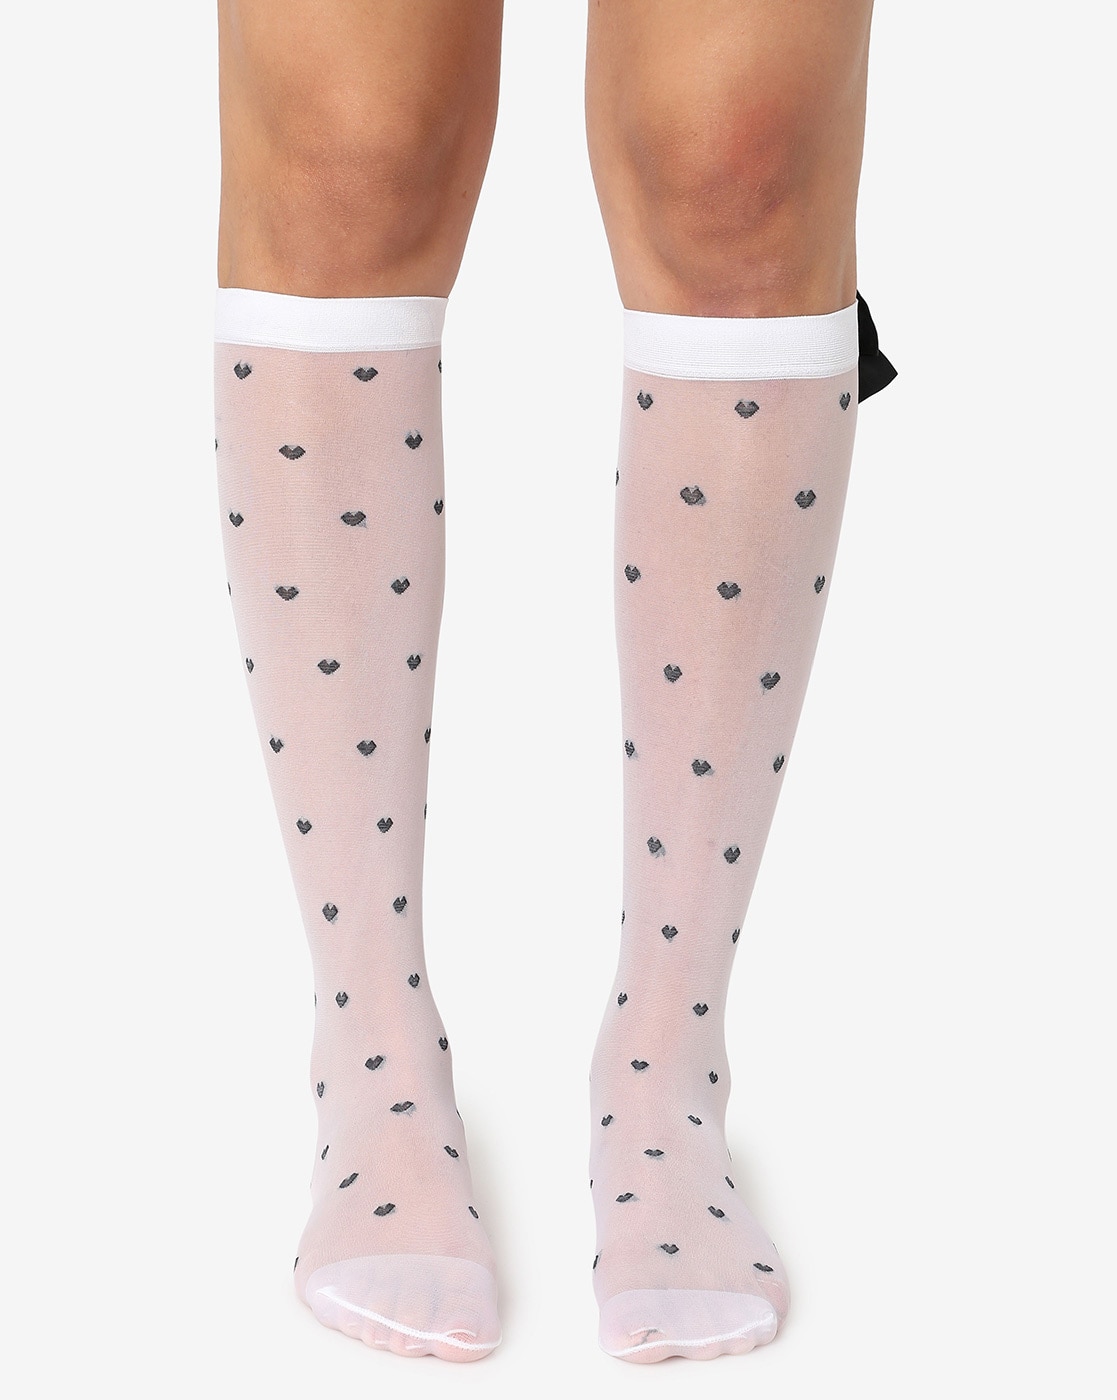 Sheer Knee High Polka Dot Socks in White with Pink Bow - The